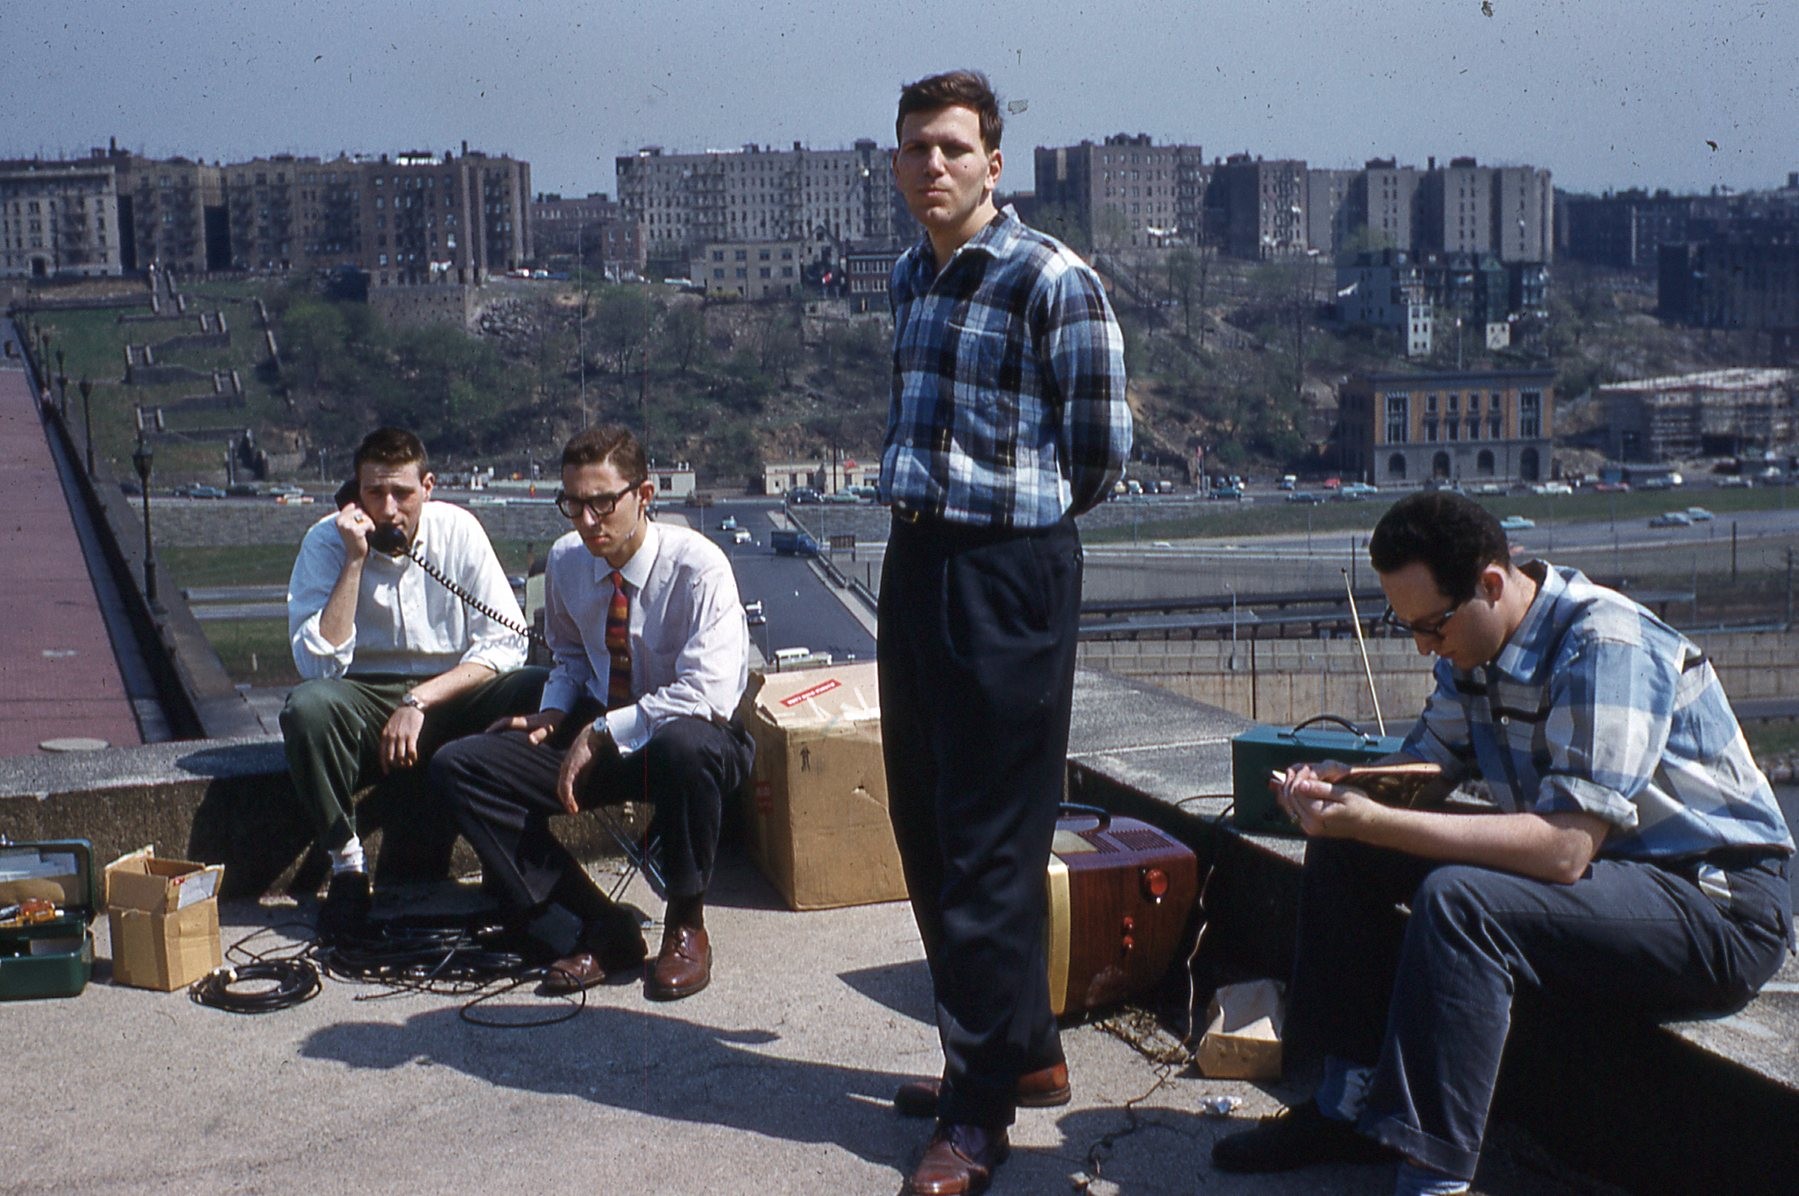 Photo of 3 men seated and one standing on rooftop with distant buildings in background